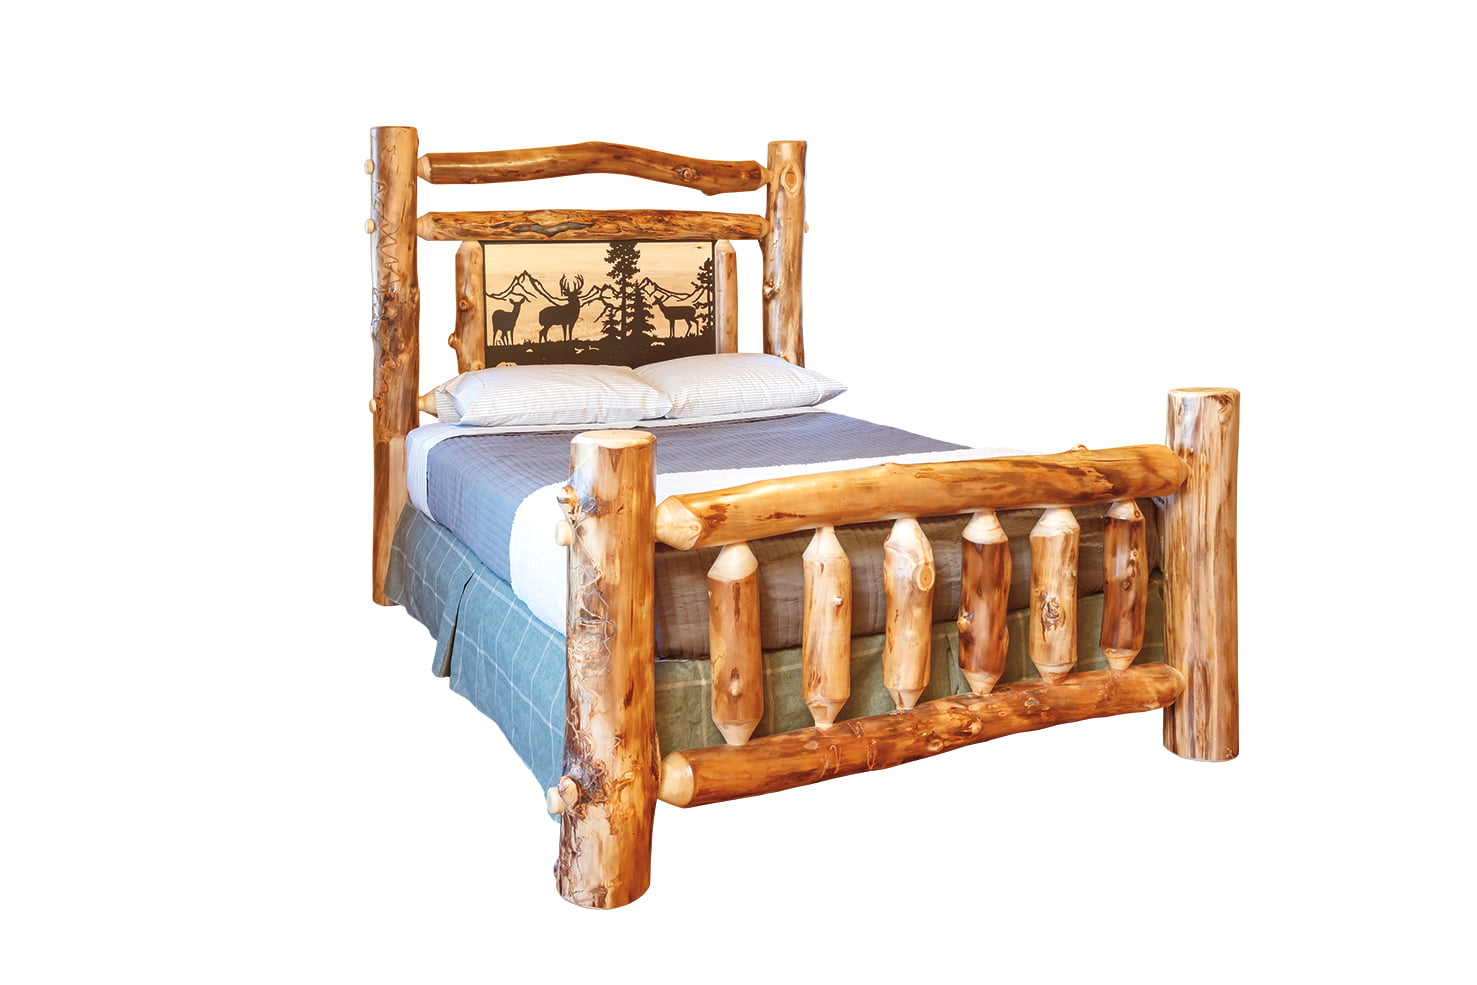 Rustic Aspen Log Complete Bedroom Set - Includes Bed, 5-Drawer Chest, and 1-Drawer Nightstand